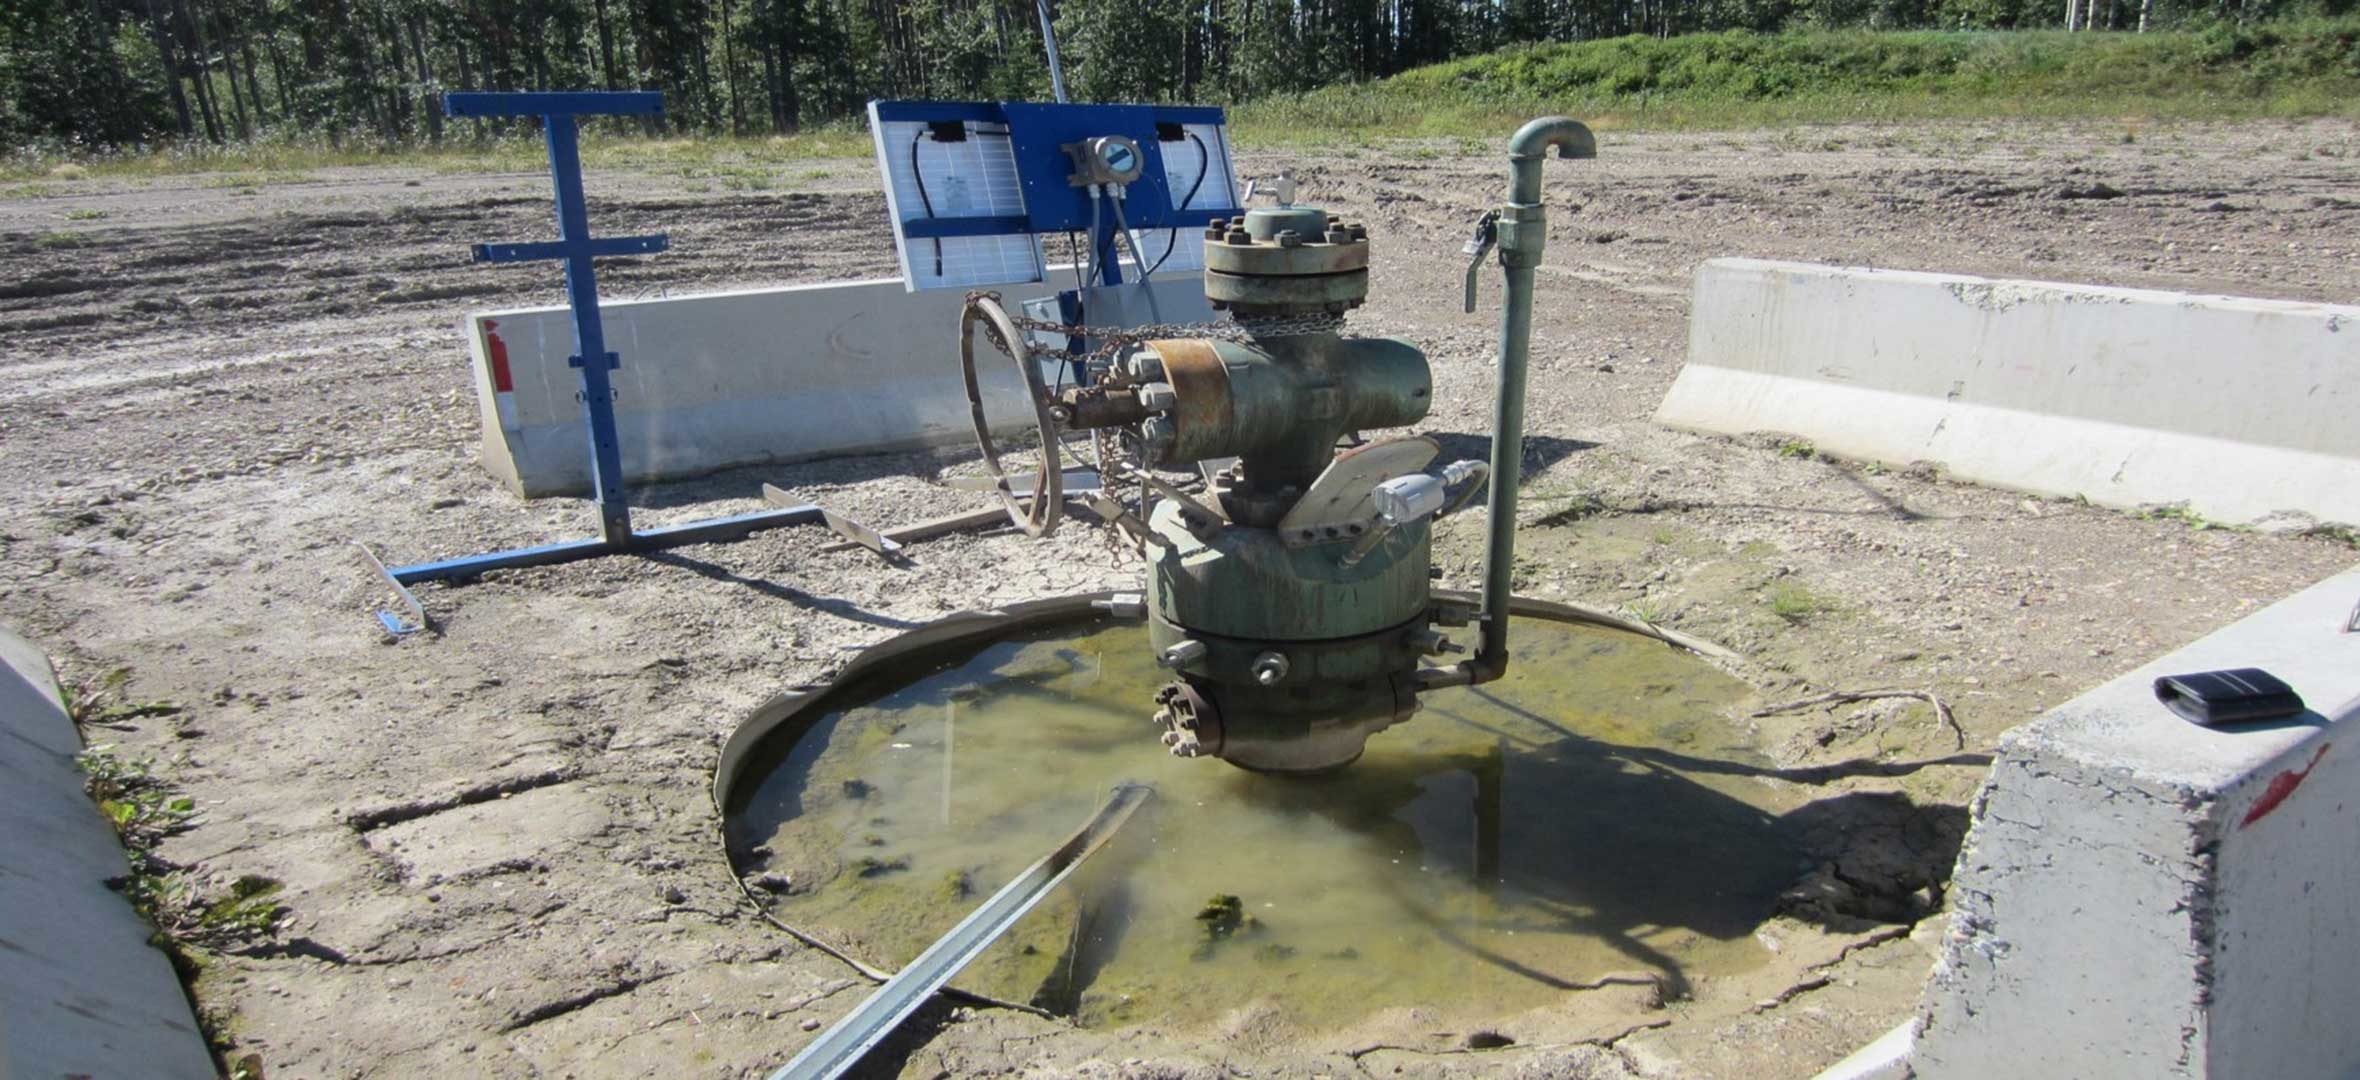 A suspended oil well